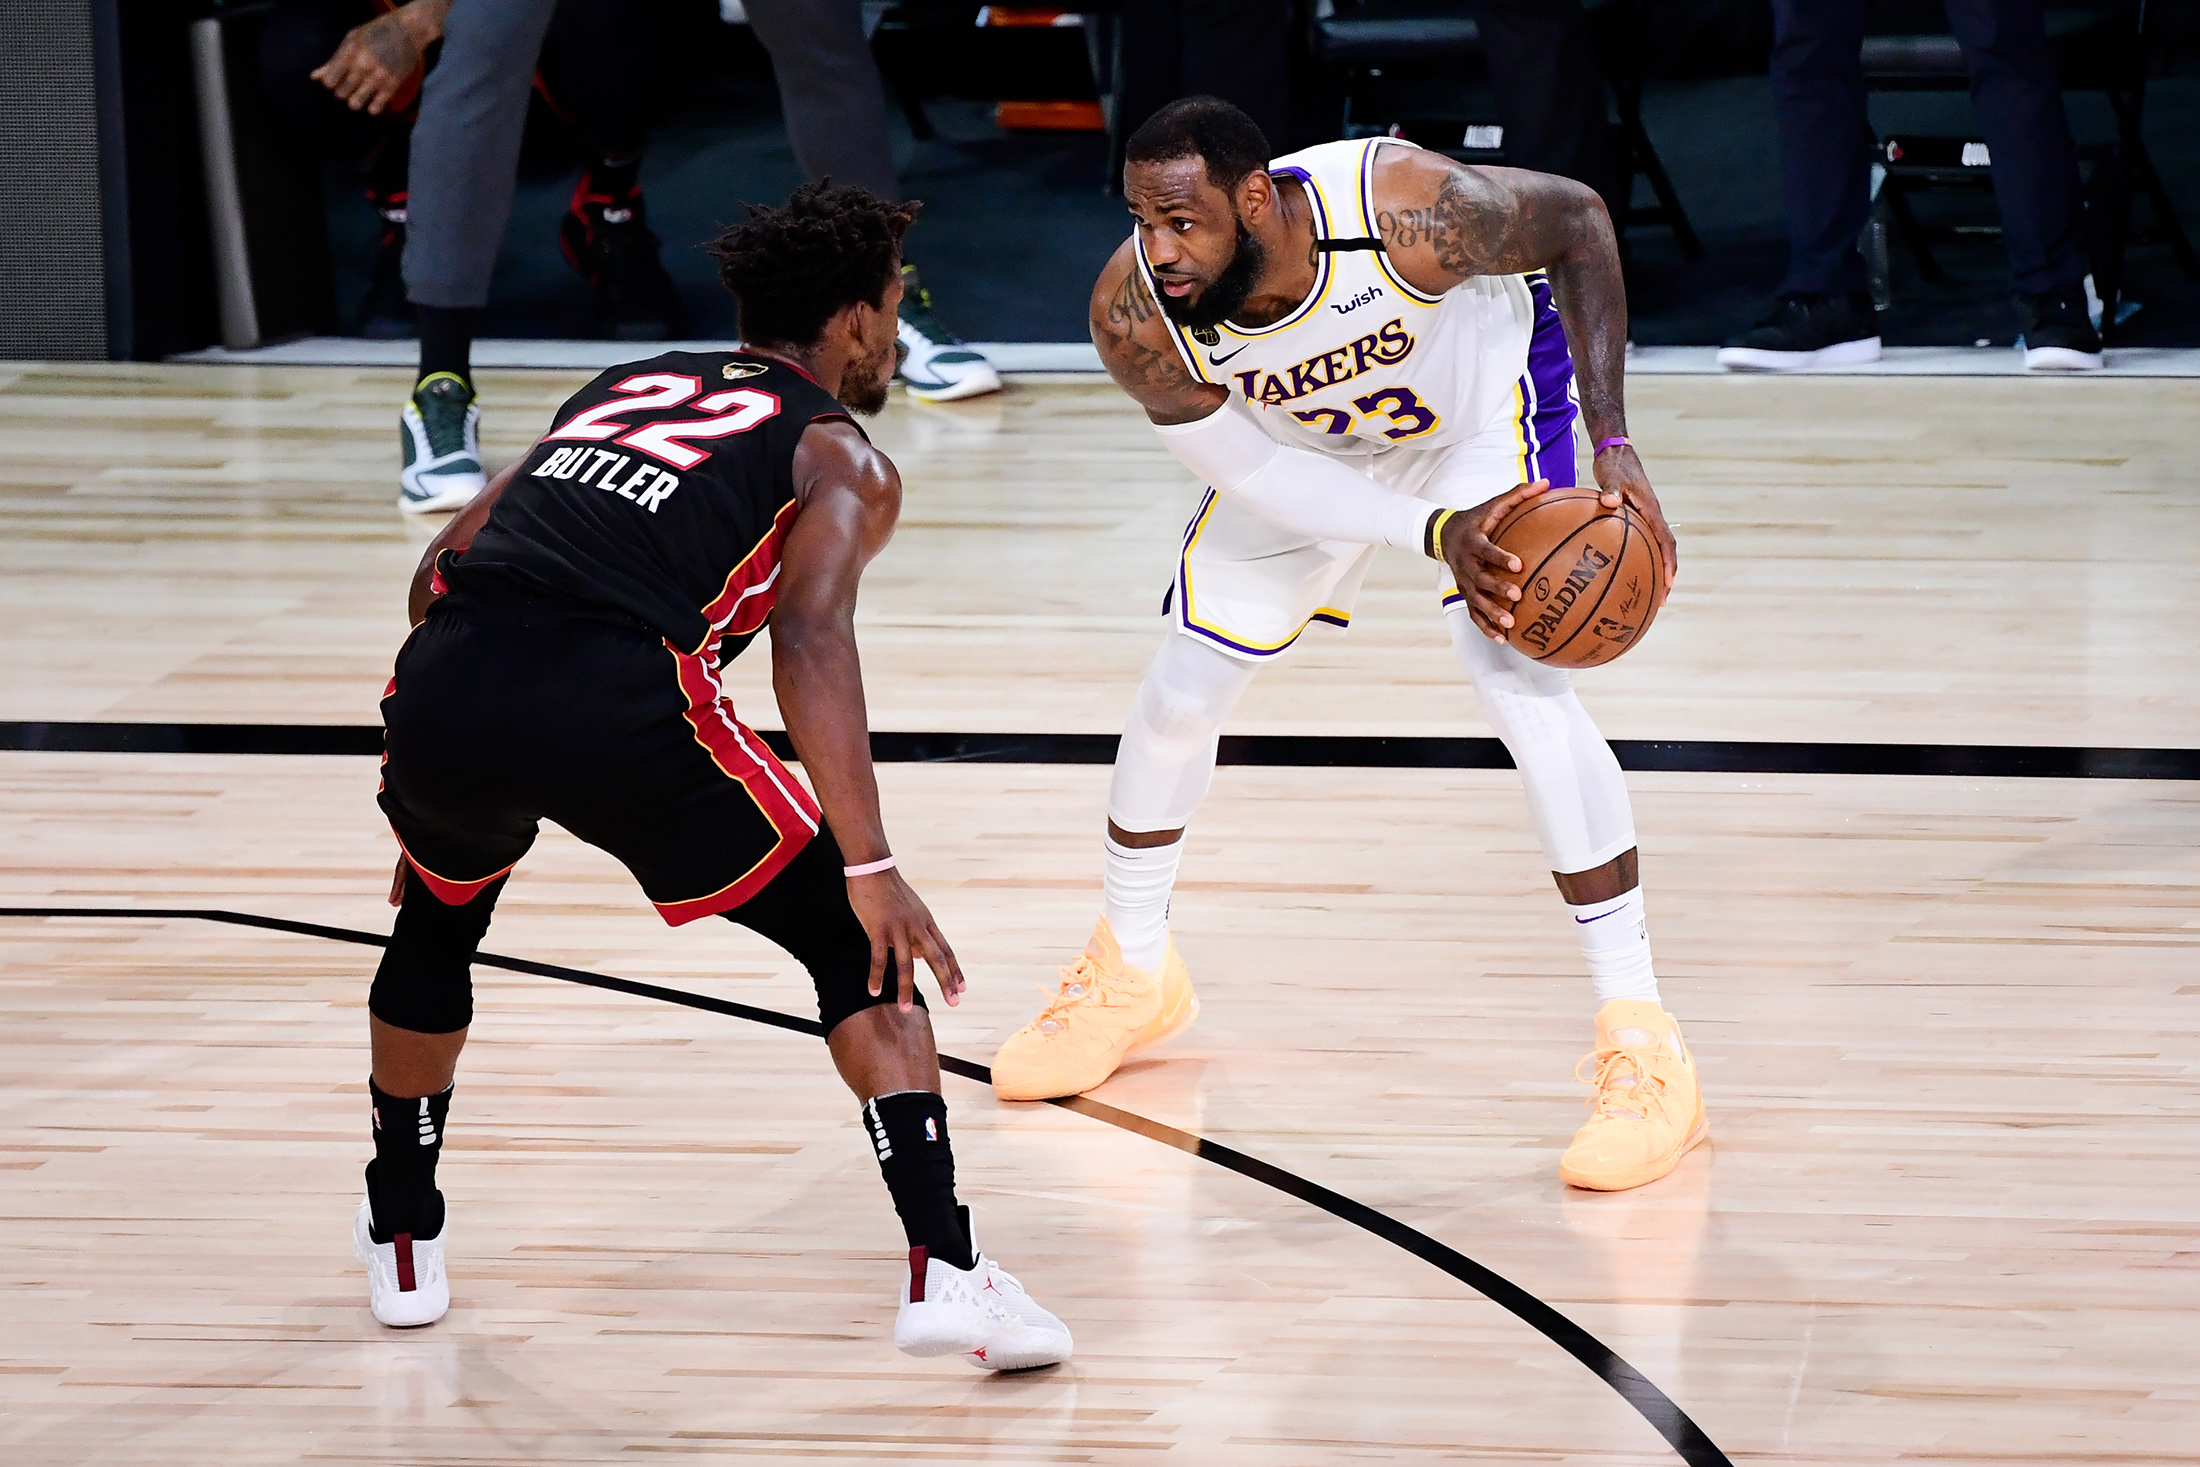 Nba Finals Ratings Decline 51 From Last Year Point To Trouble In Tv Watching Bloomberg